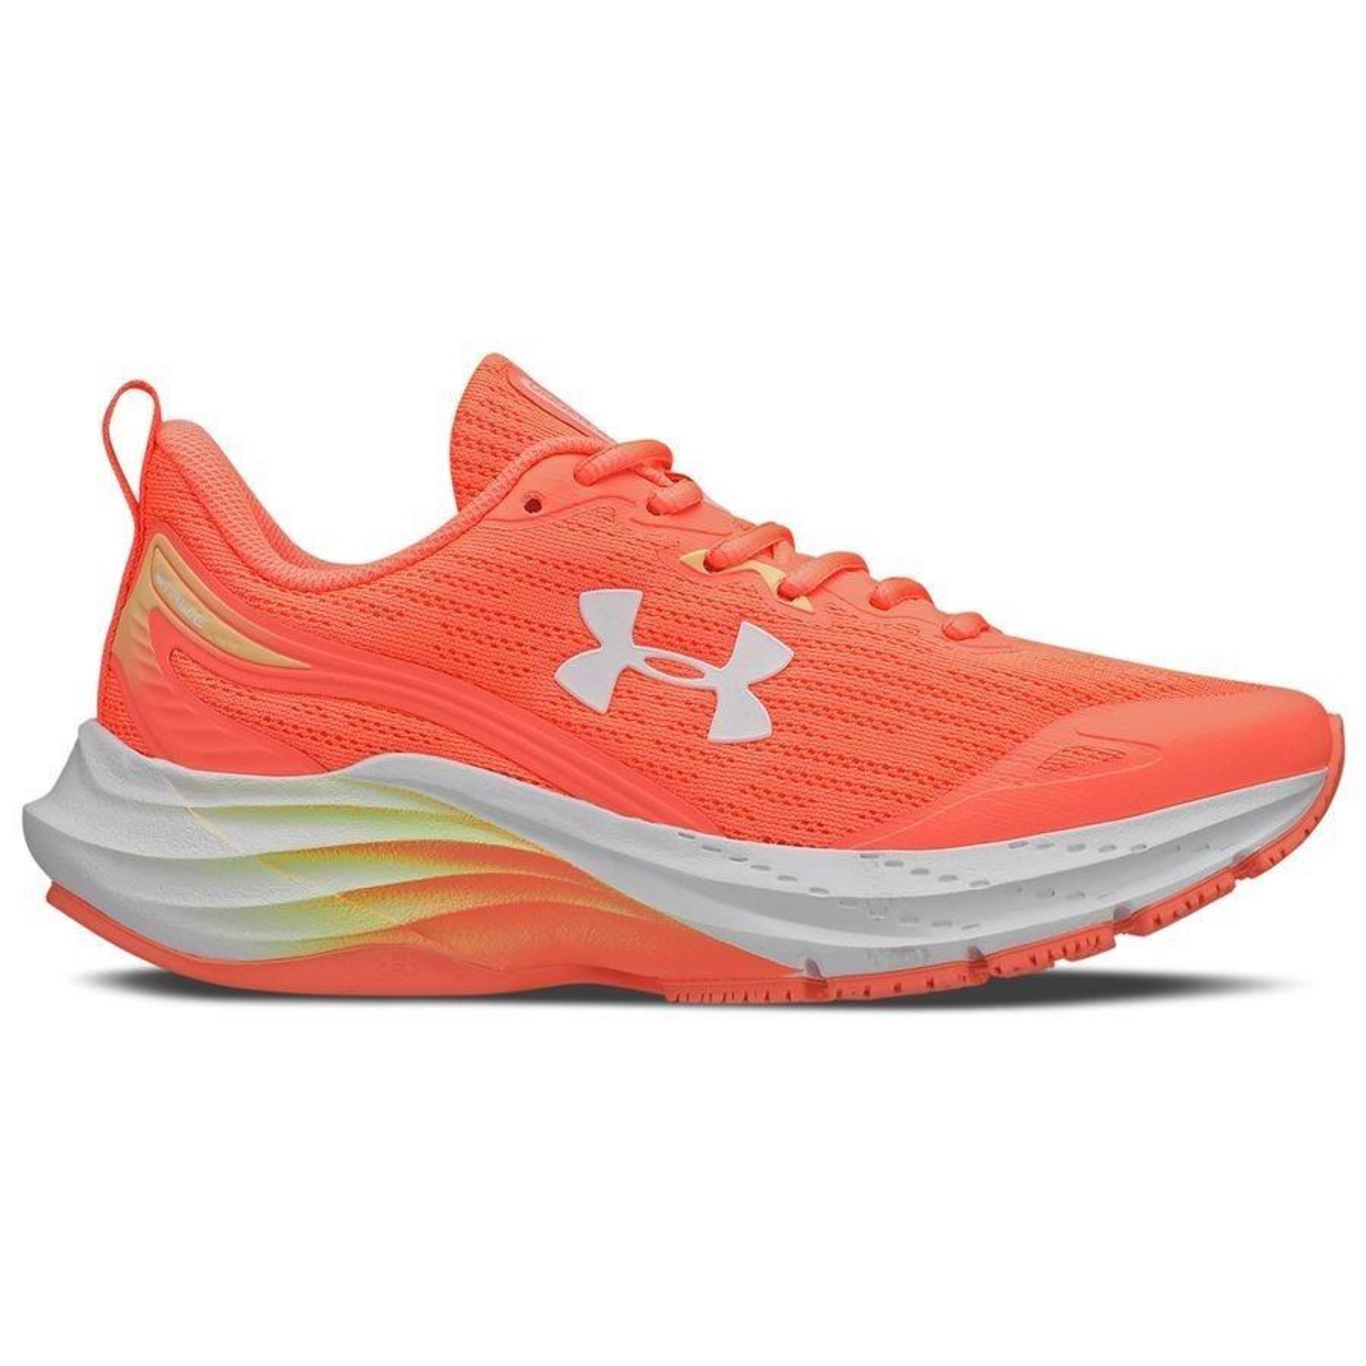 Tênis Under Armour Charged Beat Masculino - Cinza+Preto